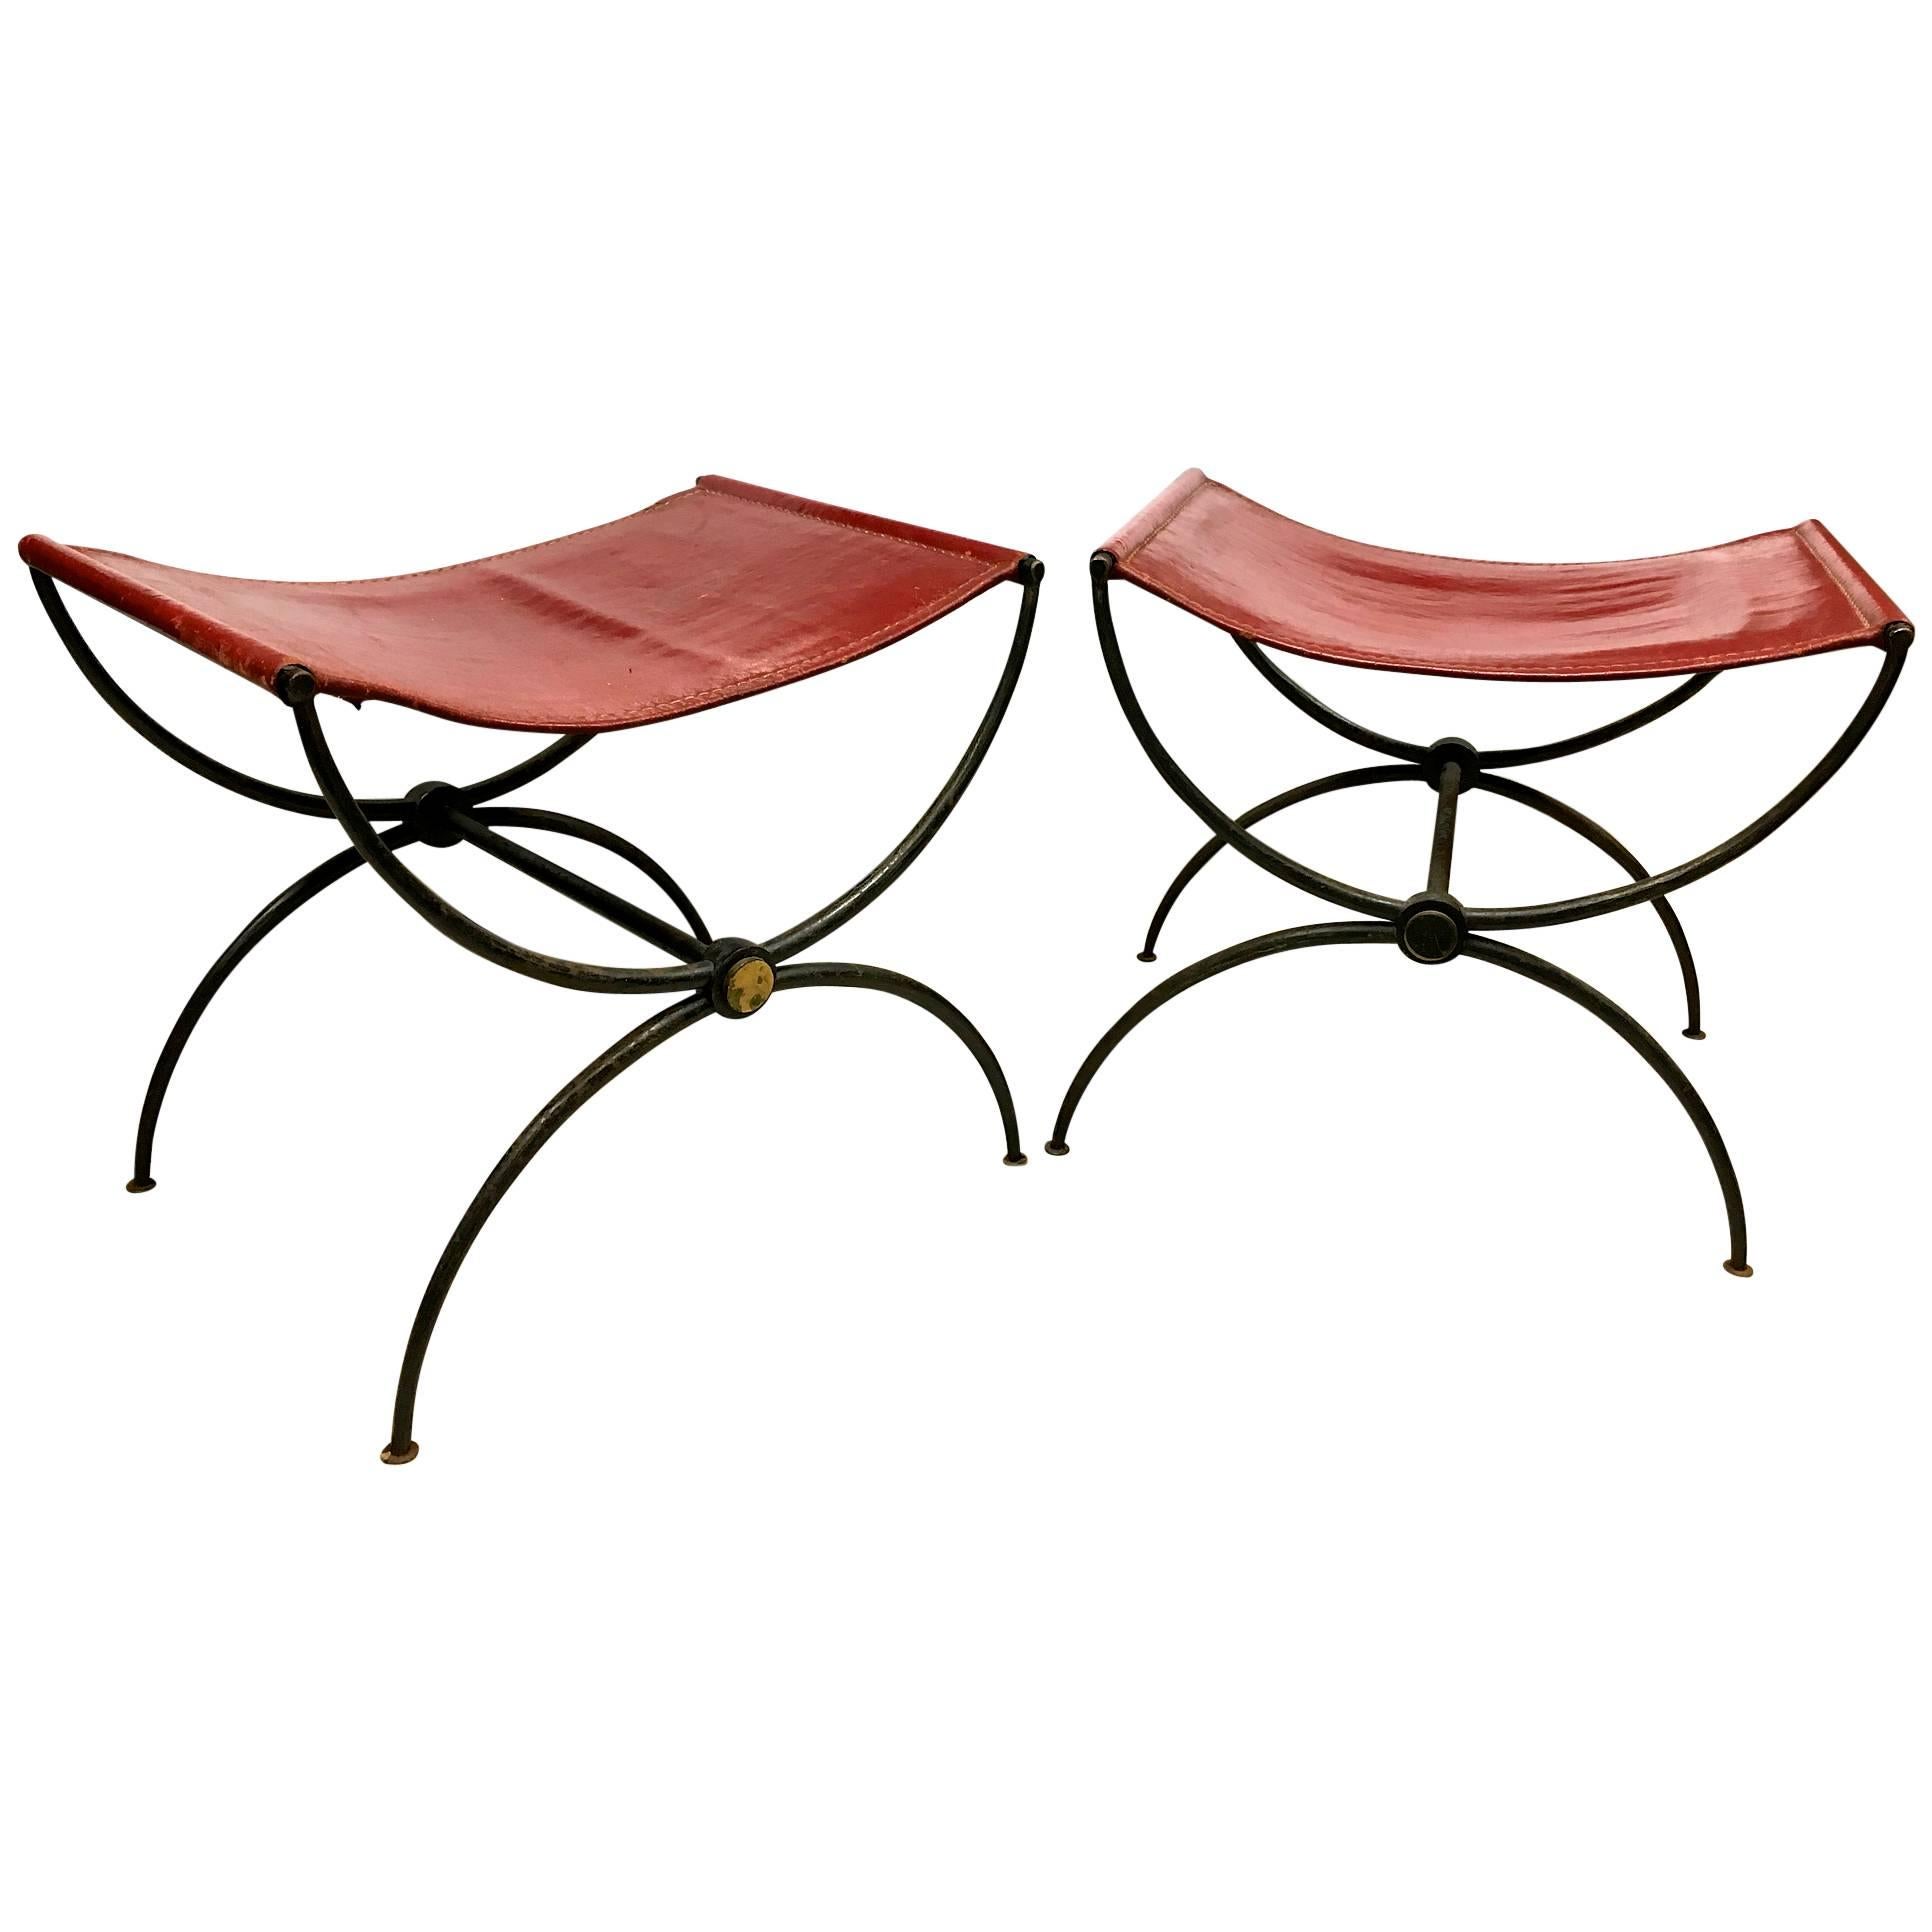 Rene Prou Pair of "X" Stools in Wrought Iron and Red Hermes Color Leather For Sale